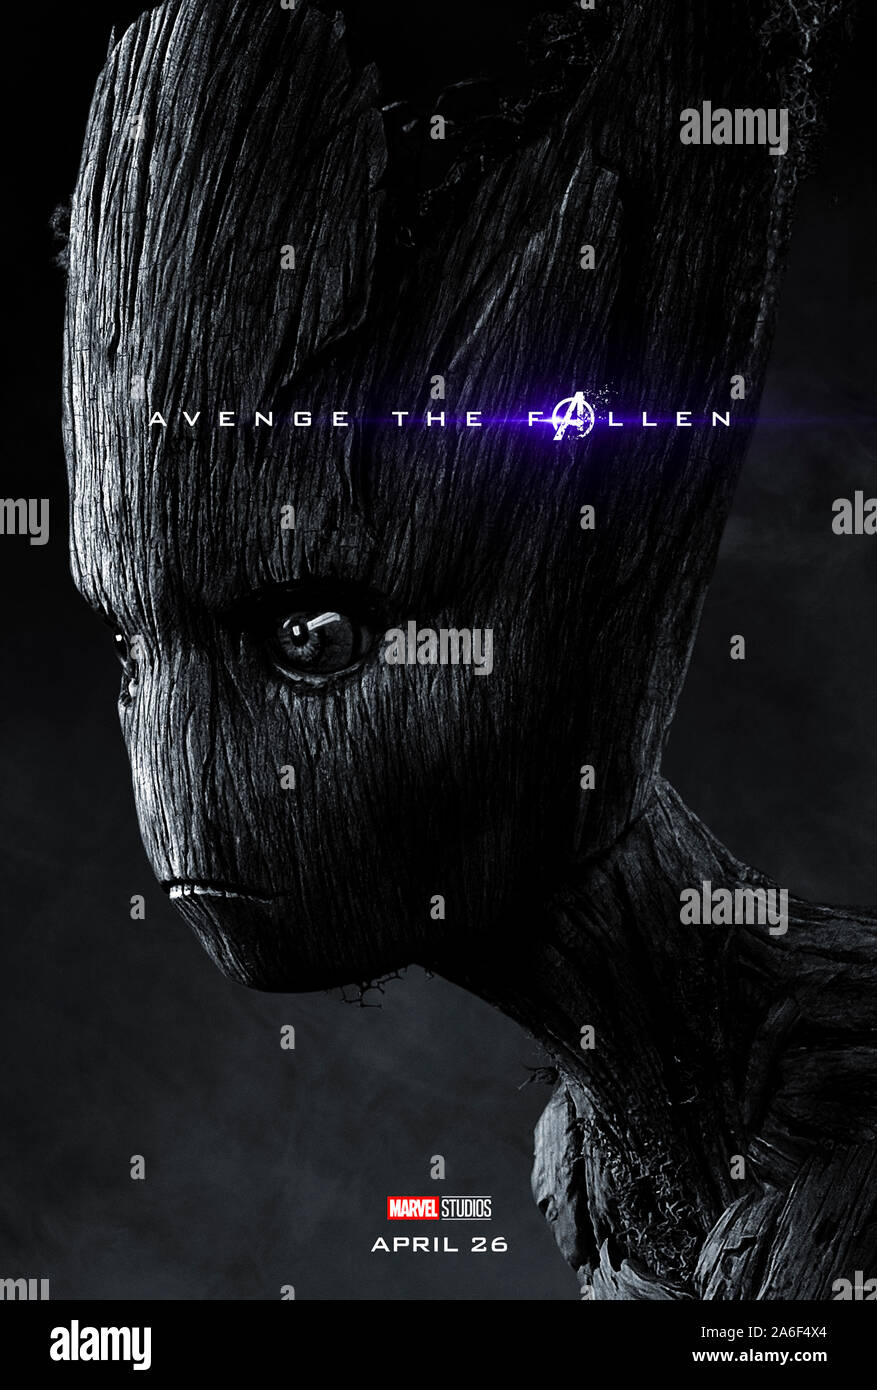 Character advance poster for Avengers: Endgame (2019) directed  by Anthony and Joe Russo starring Vin Diesel as Groot. The epic conclusion and 22nd film in the Marvel Cinematic Universe. Stock Photo